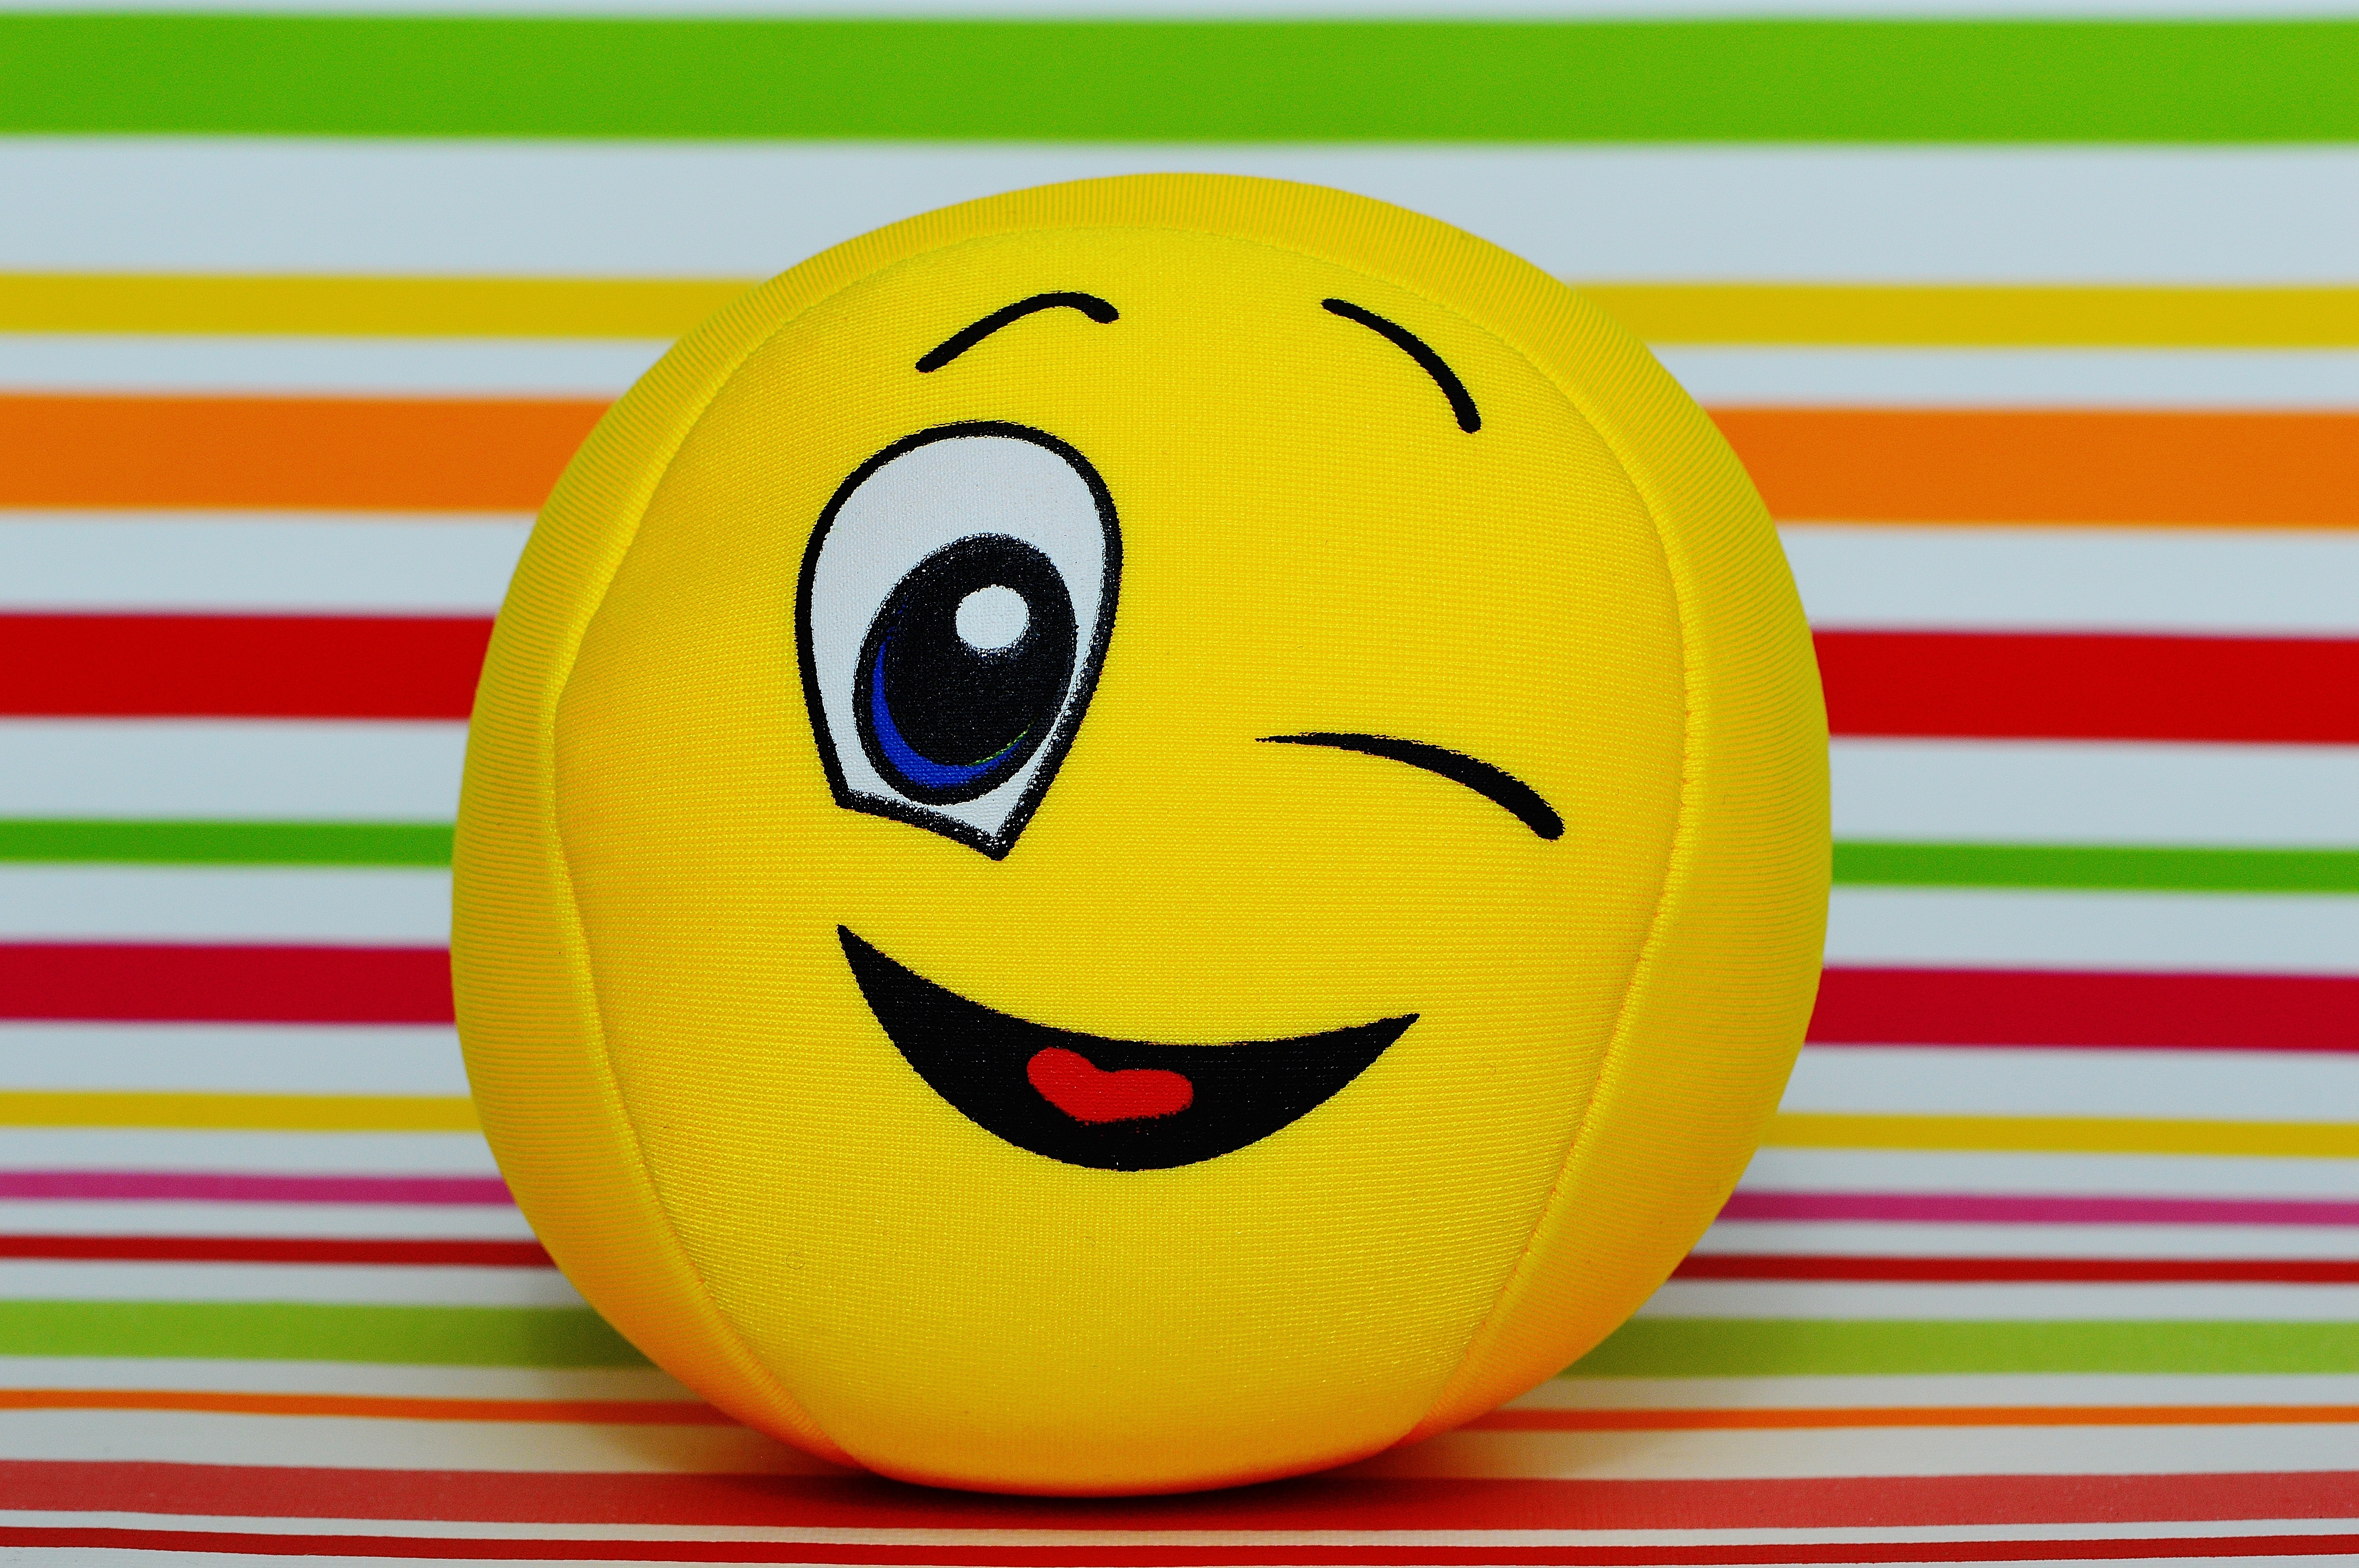 Cute, Smiley, Yellow, Funny, Sweet, Wink, toy, multi colored